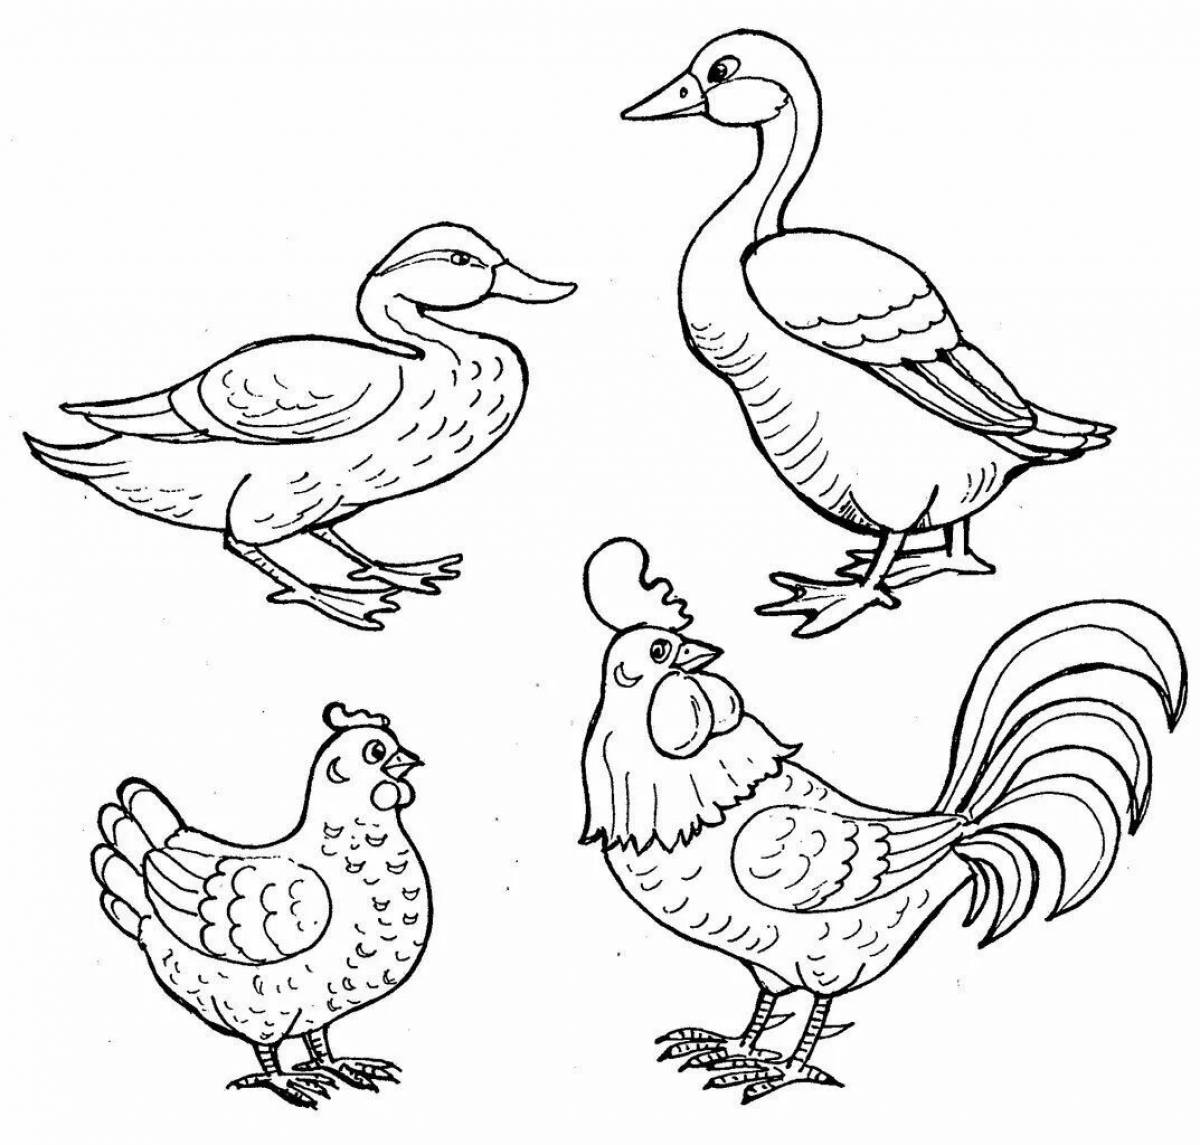 Zany poultry coloring book for kids